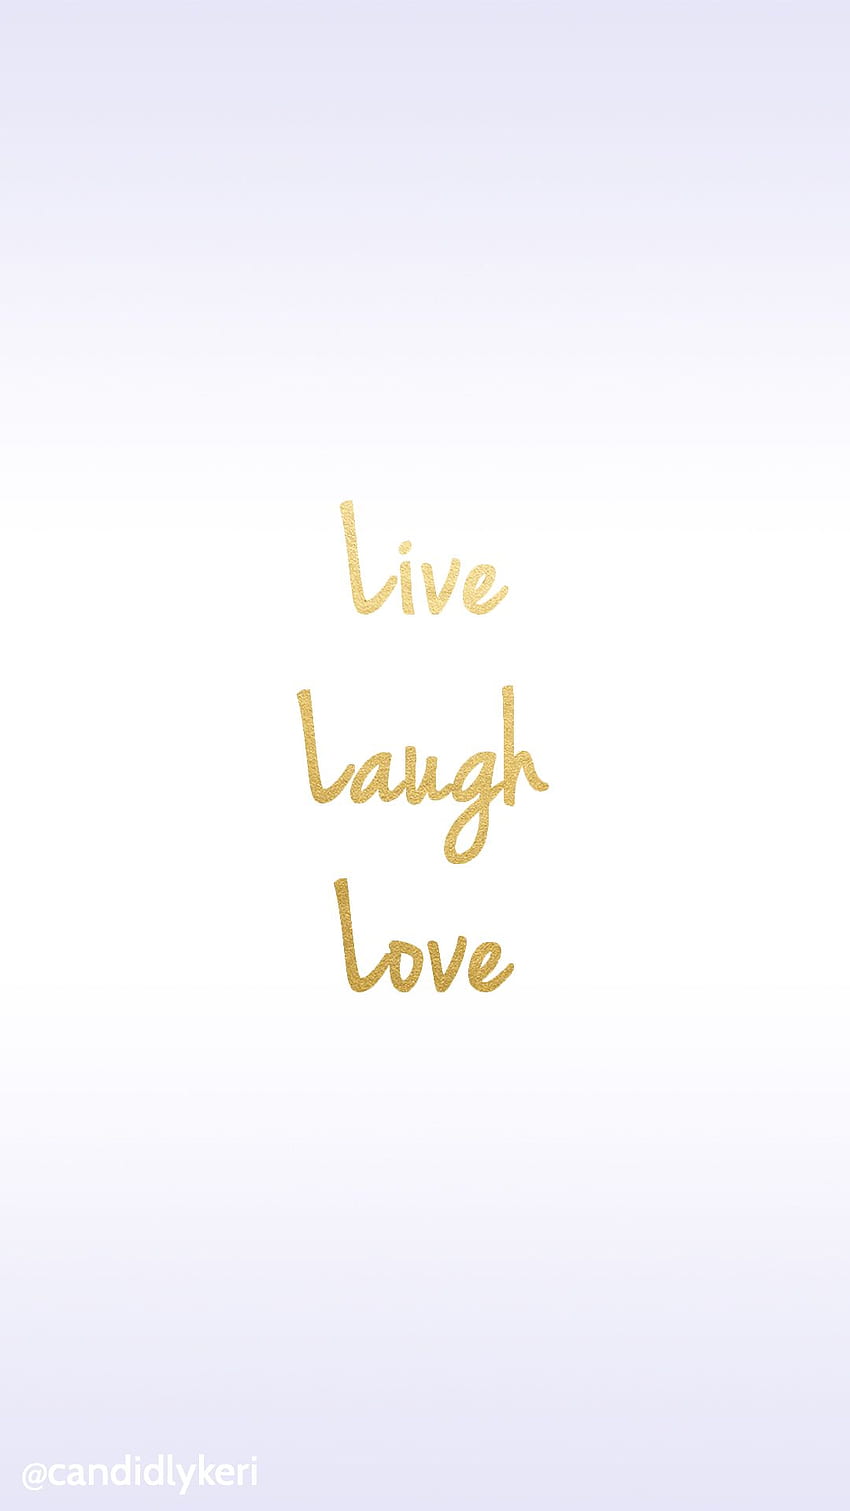 Live Laugh Love gold foil for iPhone android or background. Love quotes , iPhone quotes love, Live laugh love HD phone wallpaper